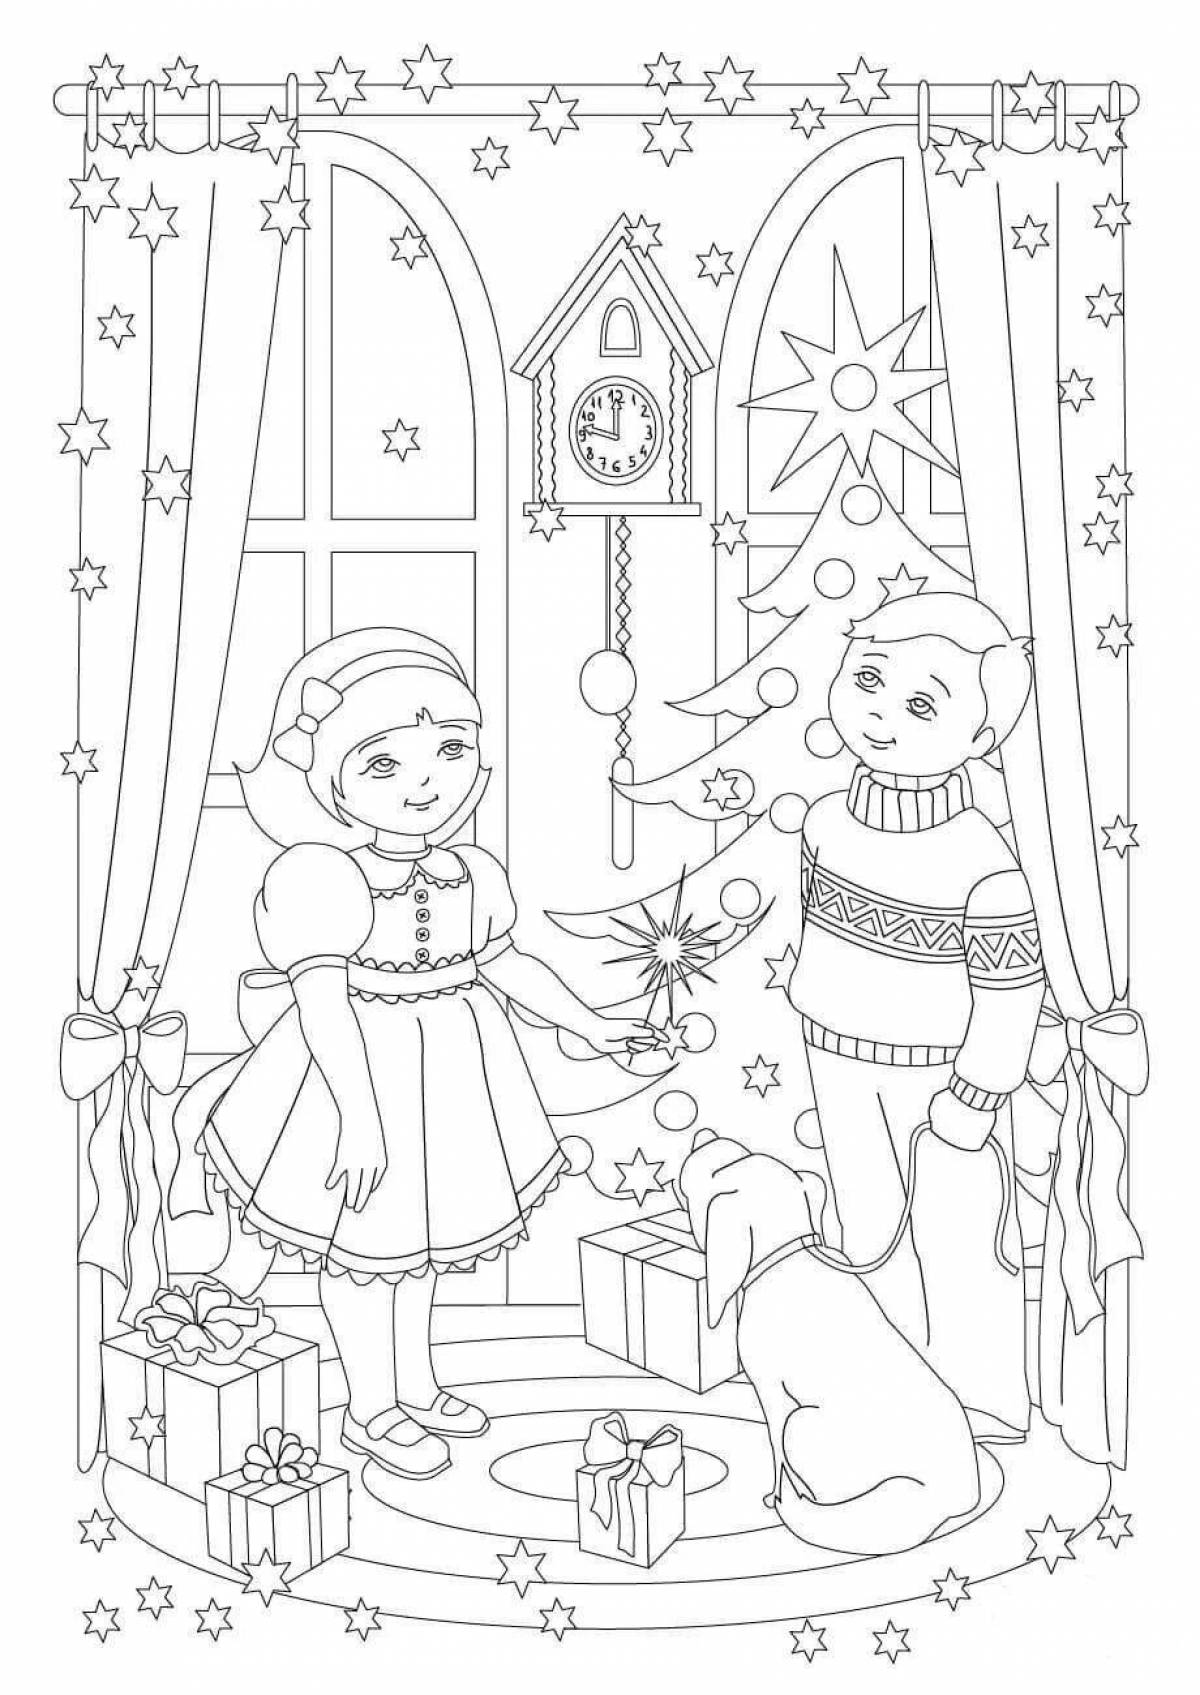 Christmas fairy tale coloring book